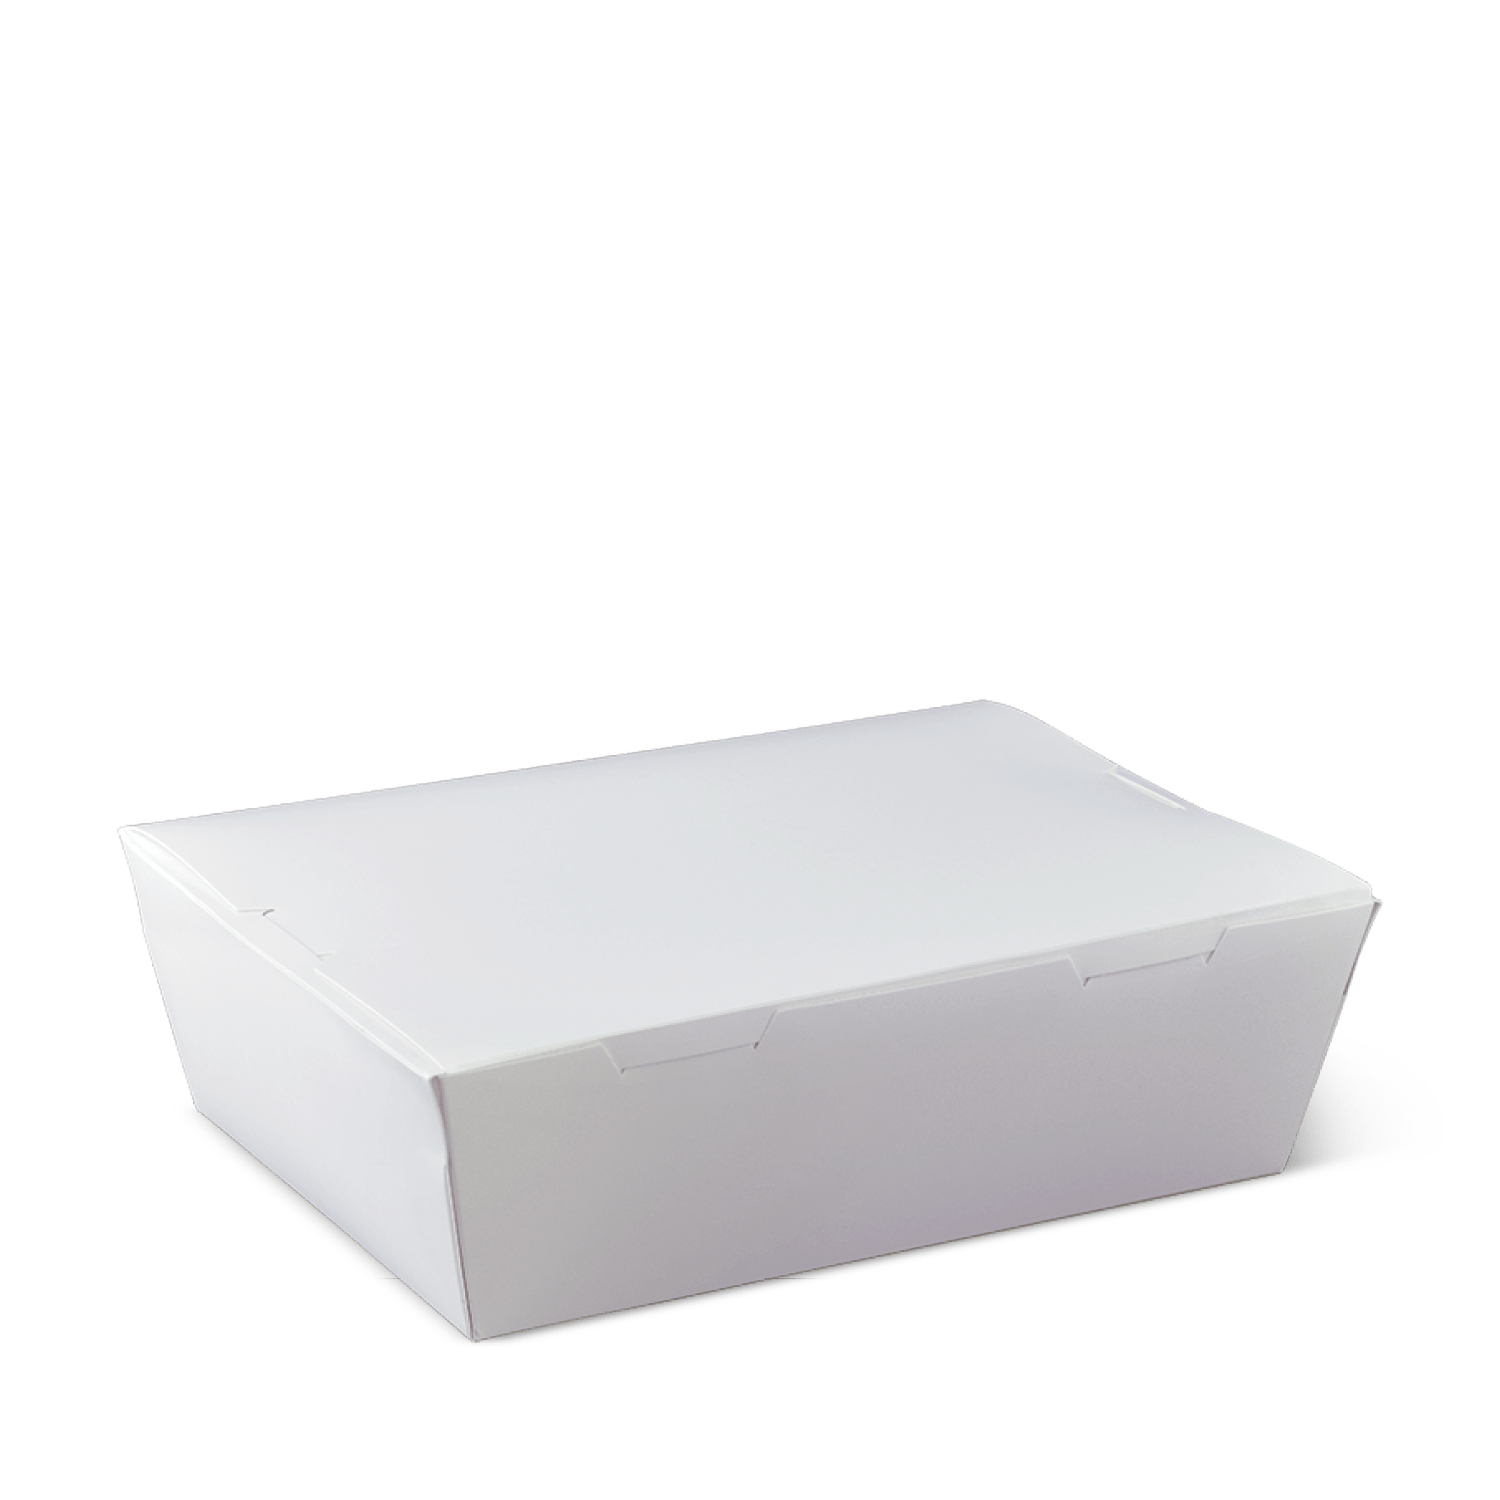 Detpak Lunch Box Large White (195mm x 140mm x 65mm) (Carton 200) (Pack 50)